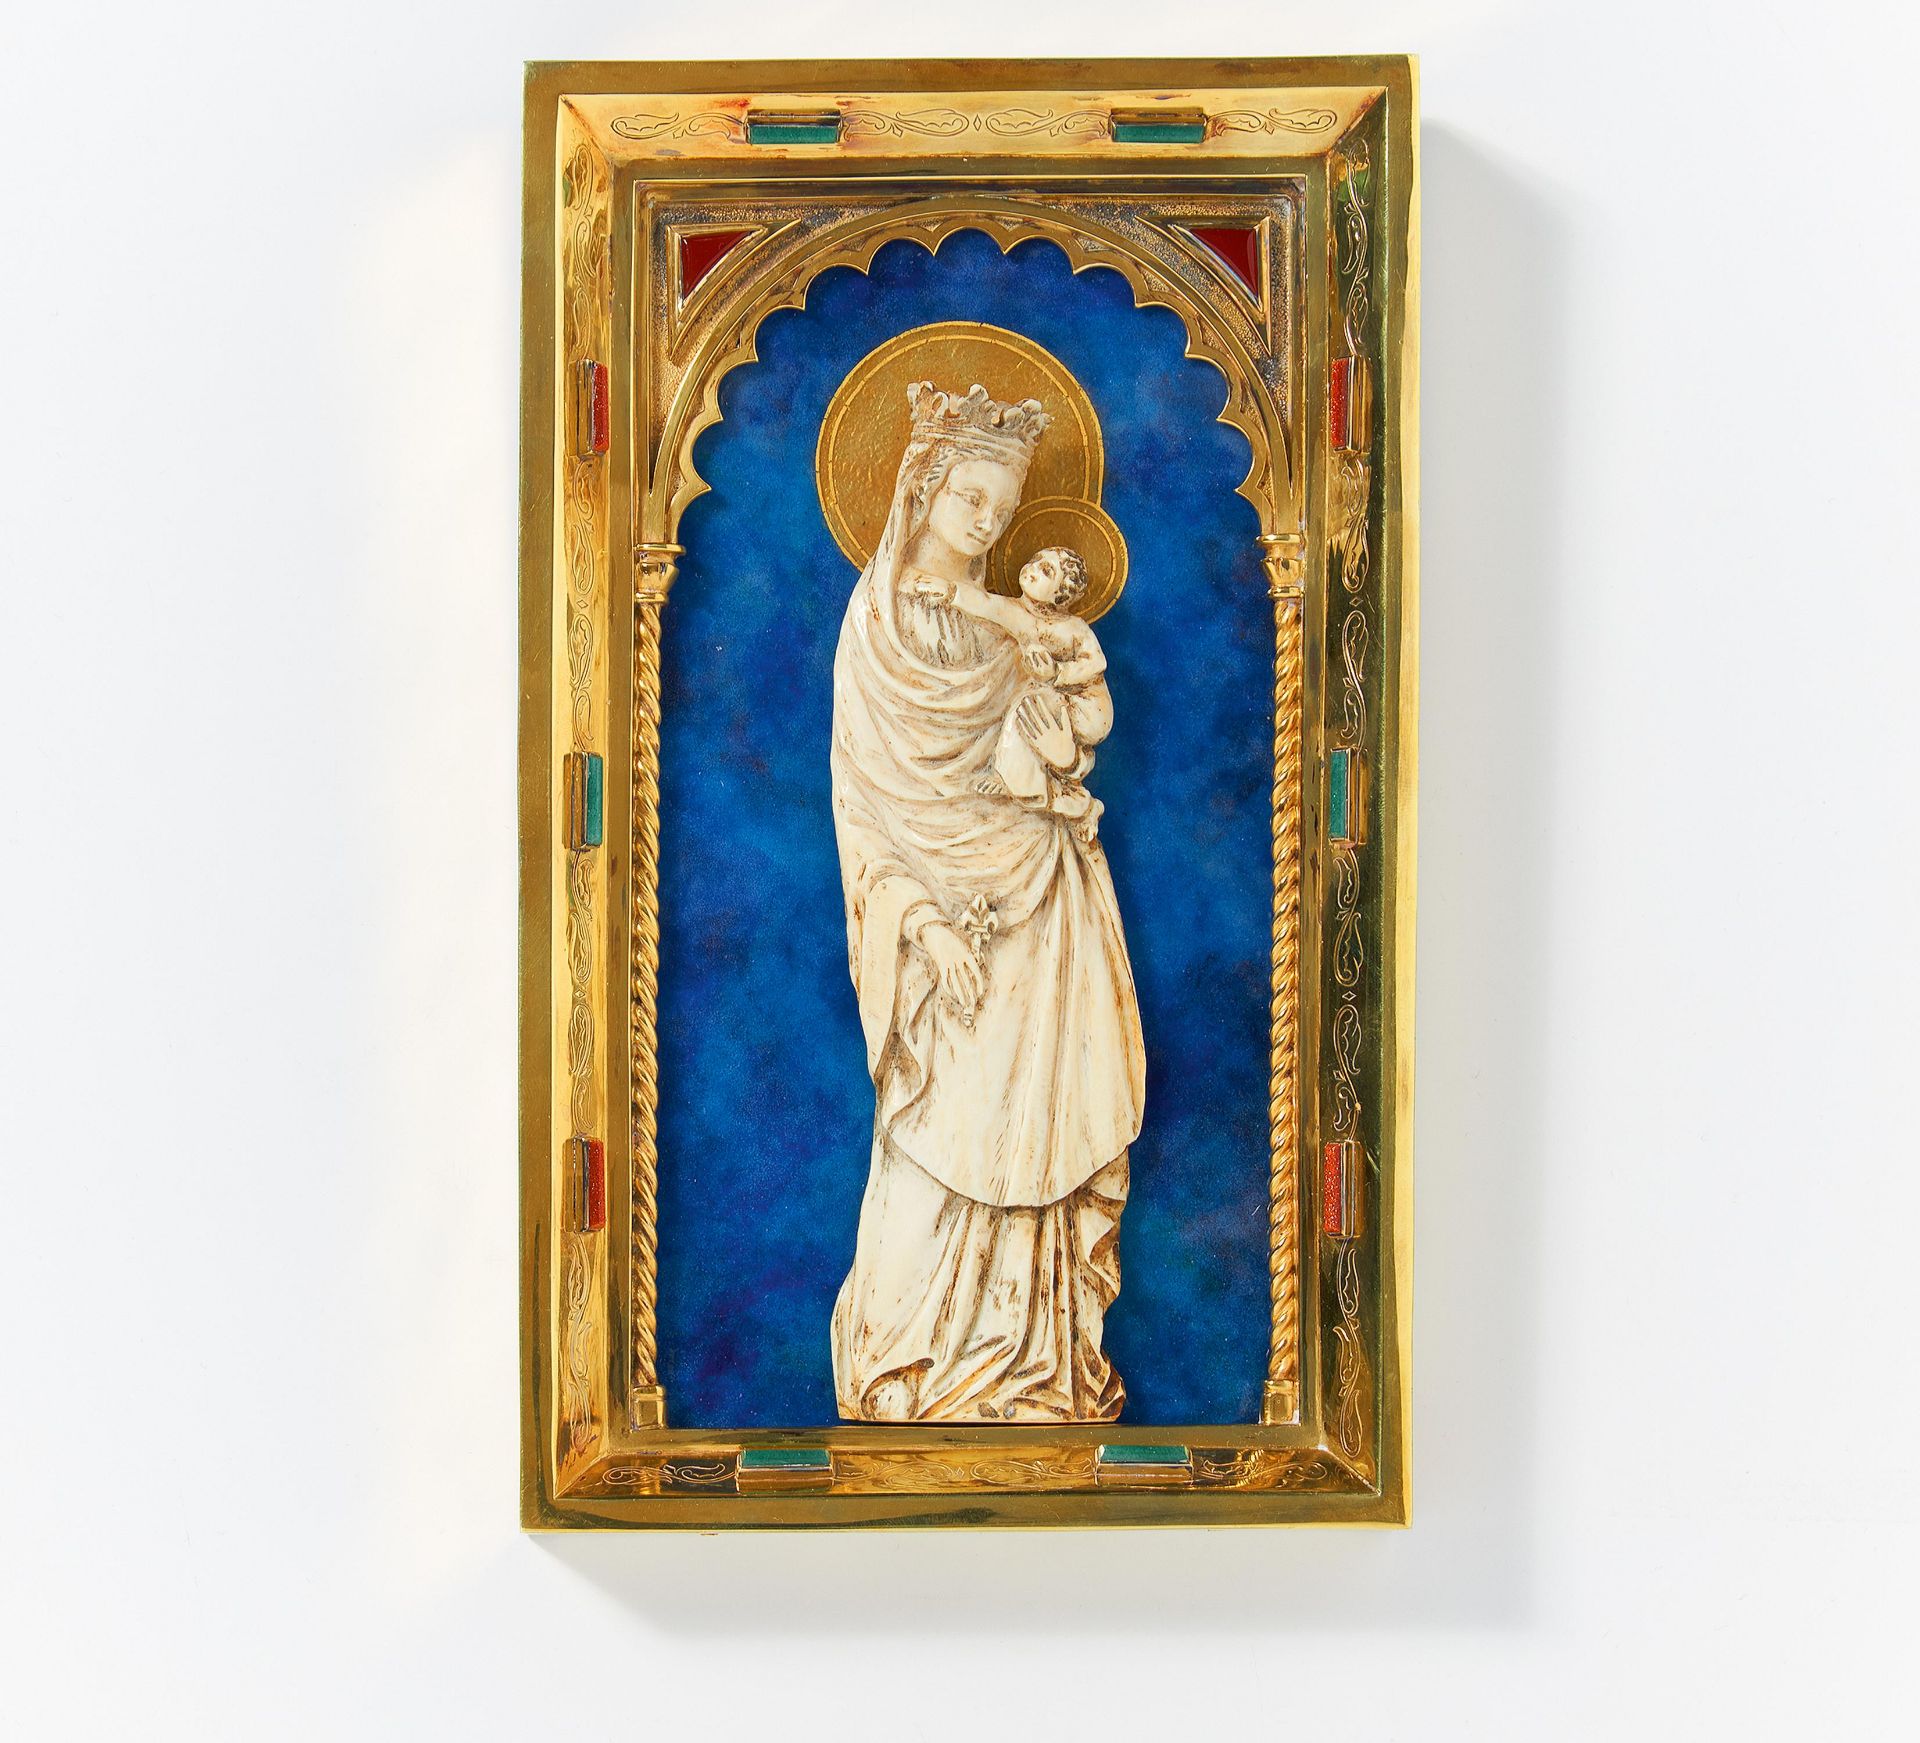 SILVER, ENAMEL AND IVORY DEVOTIONAL IMAGE OF MARY AND CHRIST CHILD. Barcelona. 20th century.